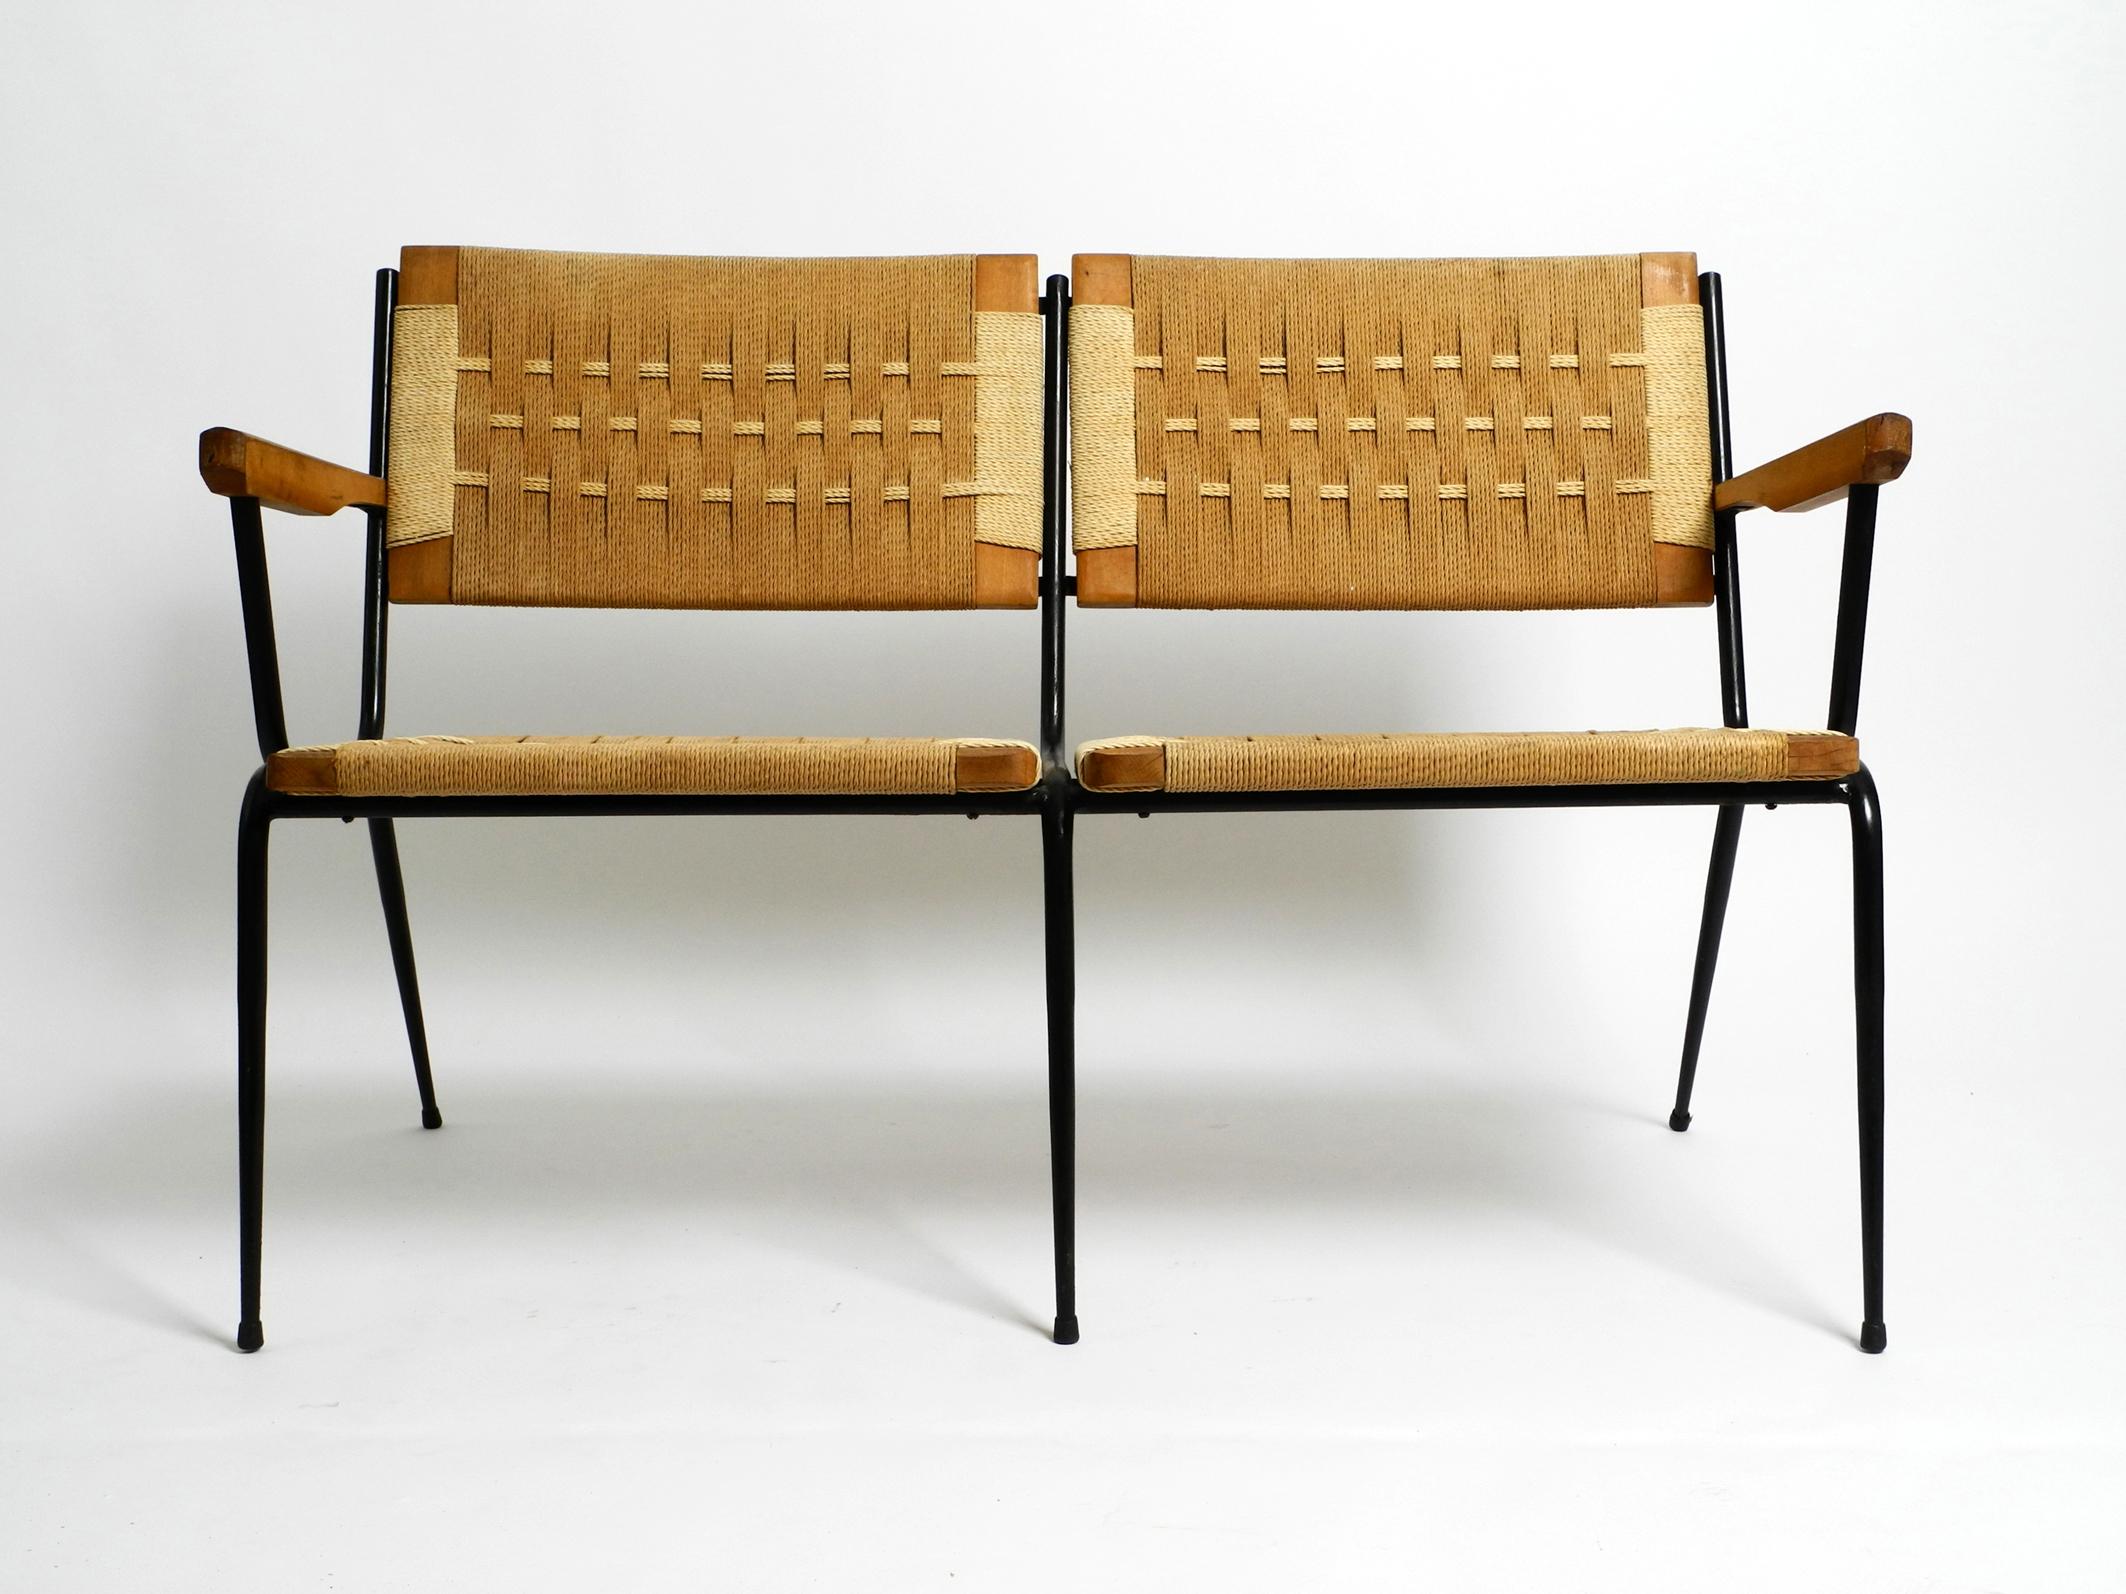 Beautiful Mid Century Italian 2-seater bench made of iron.
The frames for the seats and backrests are made of wood with wickerwork.
Great 1950's Italian design. Design by Giuseppe Pagano Pogatschnig, an Italian architect and designer.
The seats and